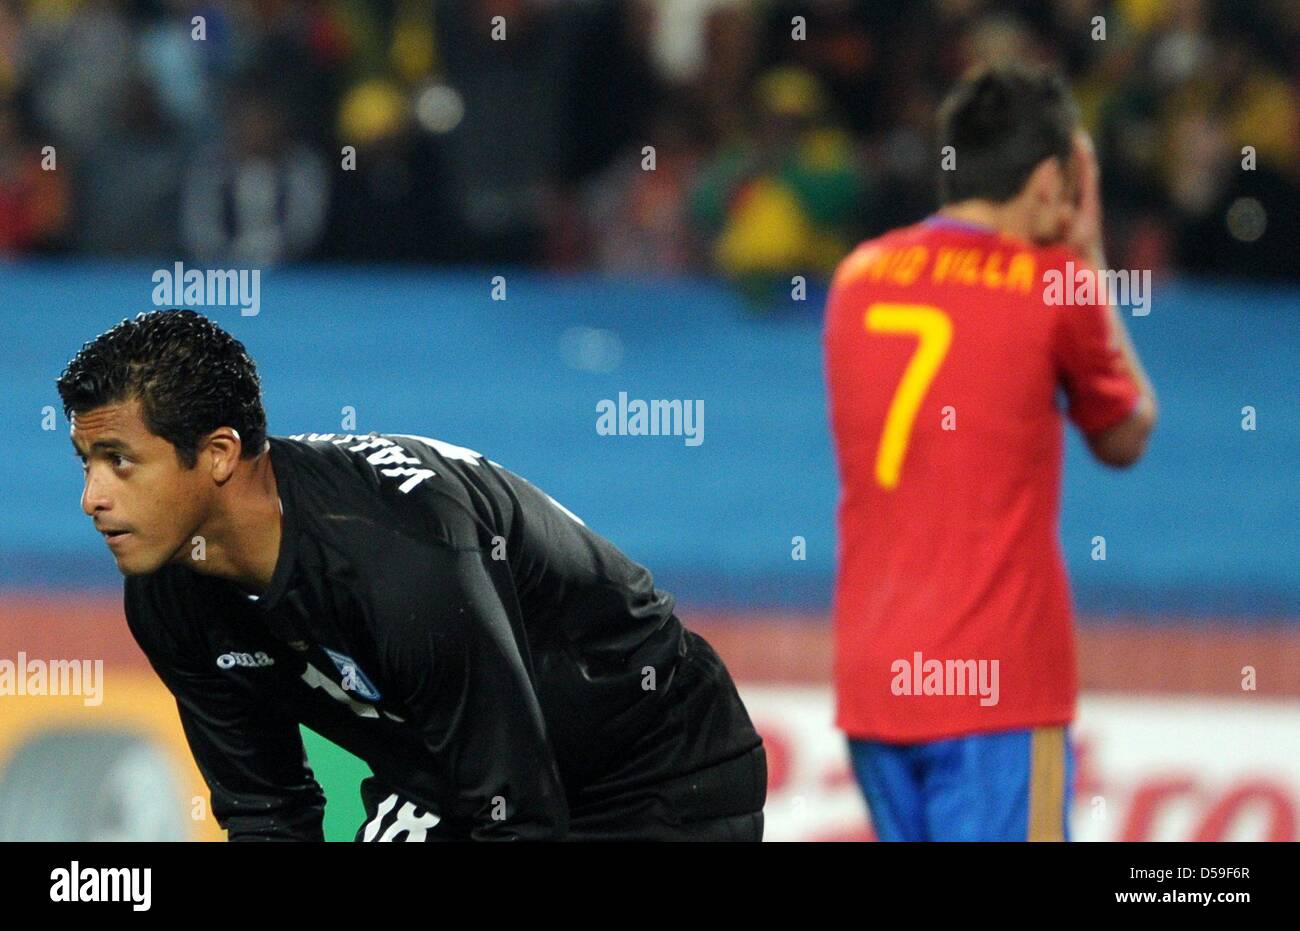 Goalkeeper Noel Valladares (L) of Honduras and David Villa (R) of Spain react after Villa missed from the penalty spot during the FIFA World Cup 2010 group H match between Spain and Honduras at the Ellis Park Stadium in Johannesburg, South Africa 21 June 2010. Photo: - Please refer to http://dpaq.de/FIFA-WM2010-TC  +++(c) dpa - Bildfunk+++ Stock Photo